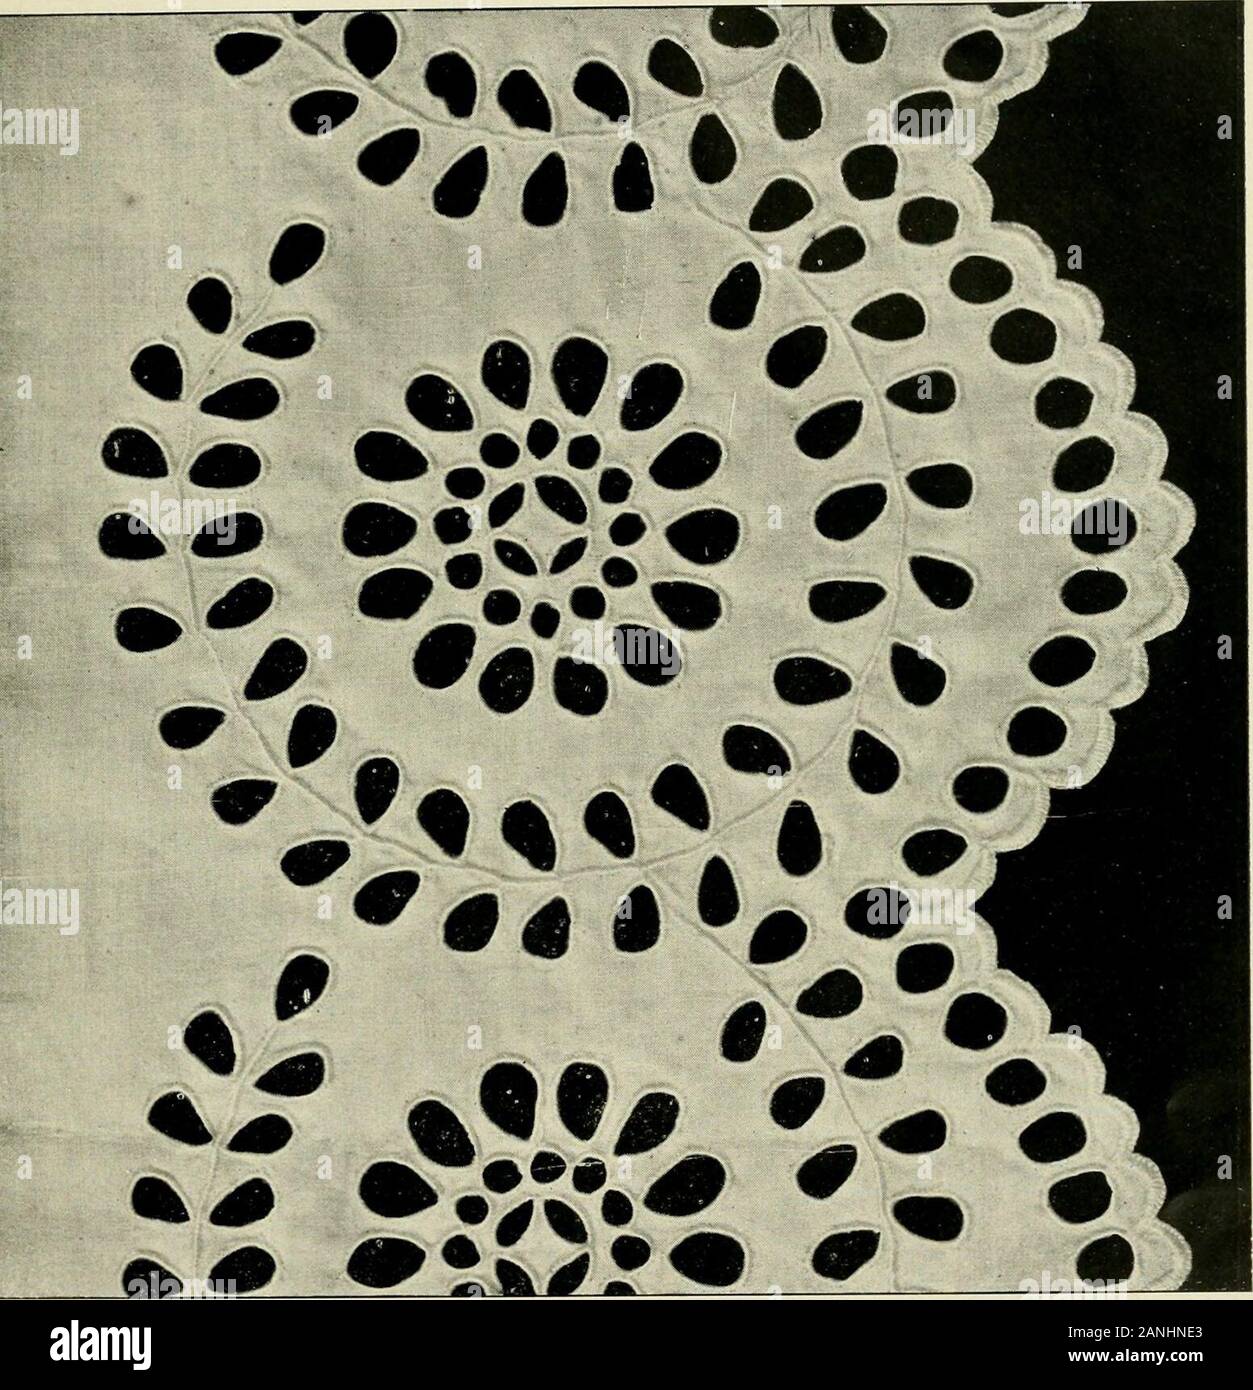 How To Work Embroidery Stitches A Practical Method With 69 Illustrations Eyelet Work Made Withthe Colon A Brodcr Rrillaiitc A La C Oix Ib Ii 25 V